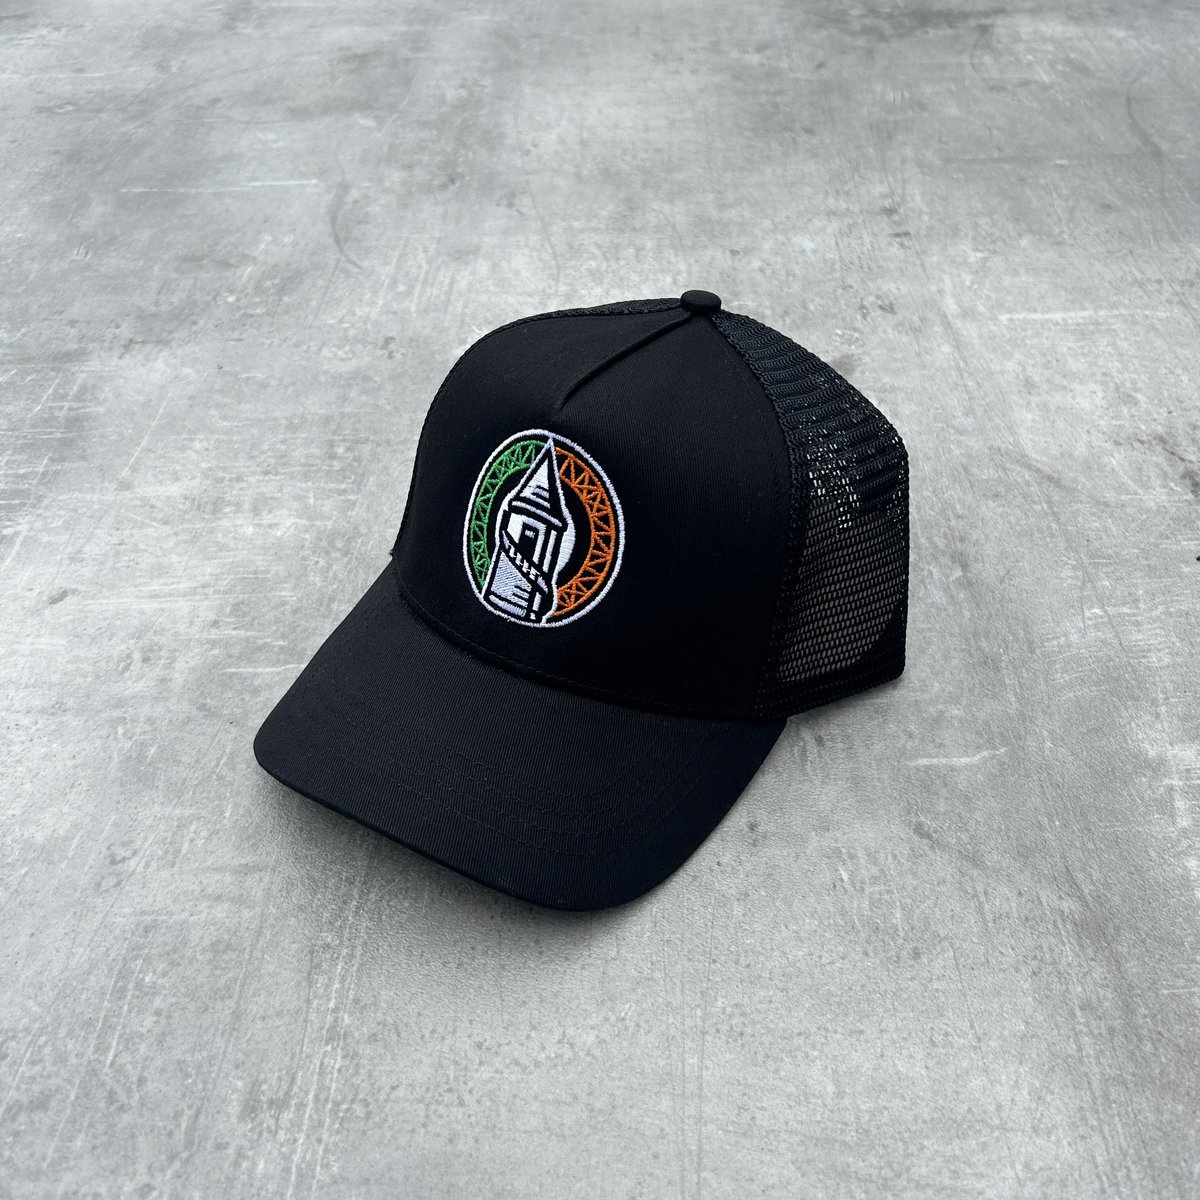 ALT cap 23 edition 🇮🇪 One for the skipper. Limited to only 23 caps. Get yours now blues: royalflushdesigns.co.uk/products/23-al…